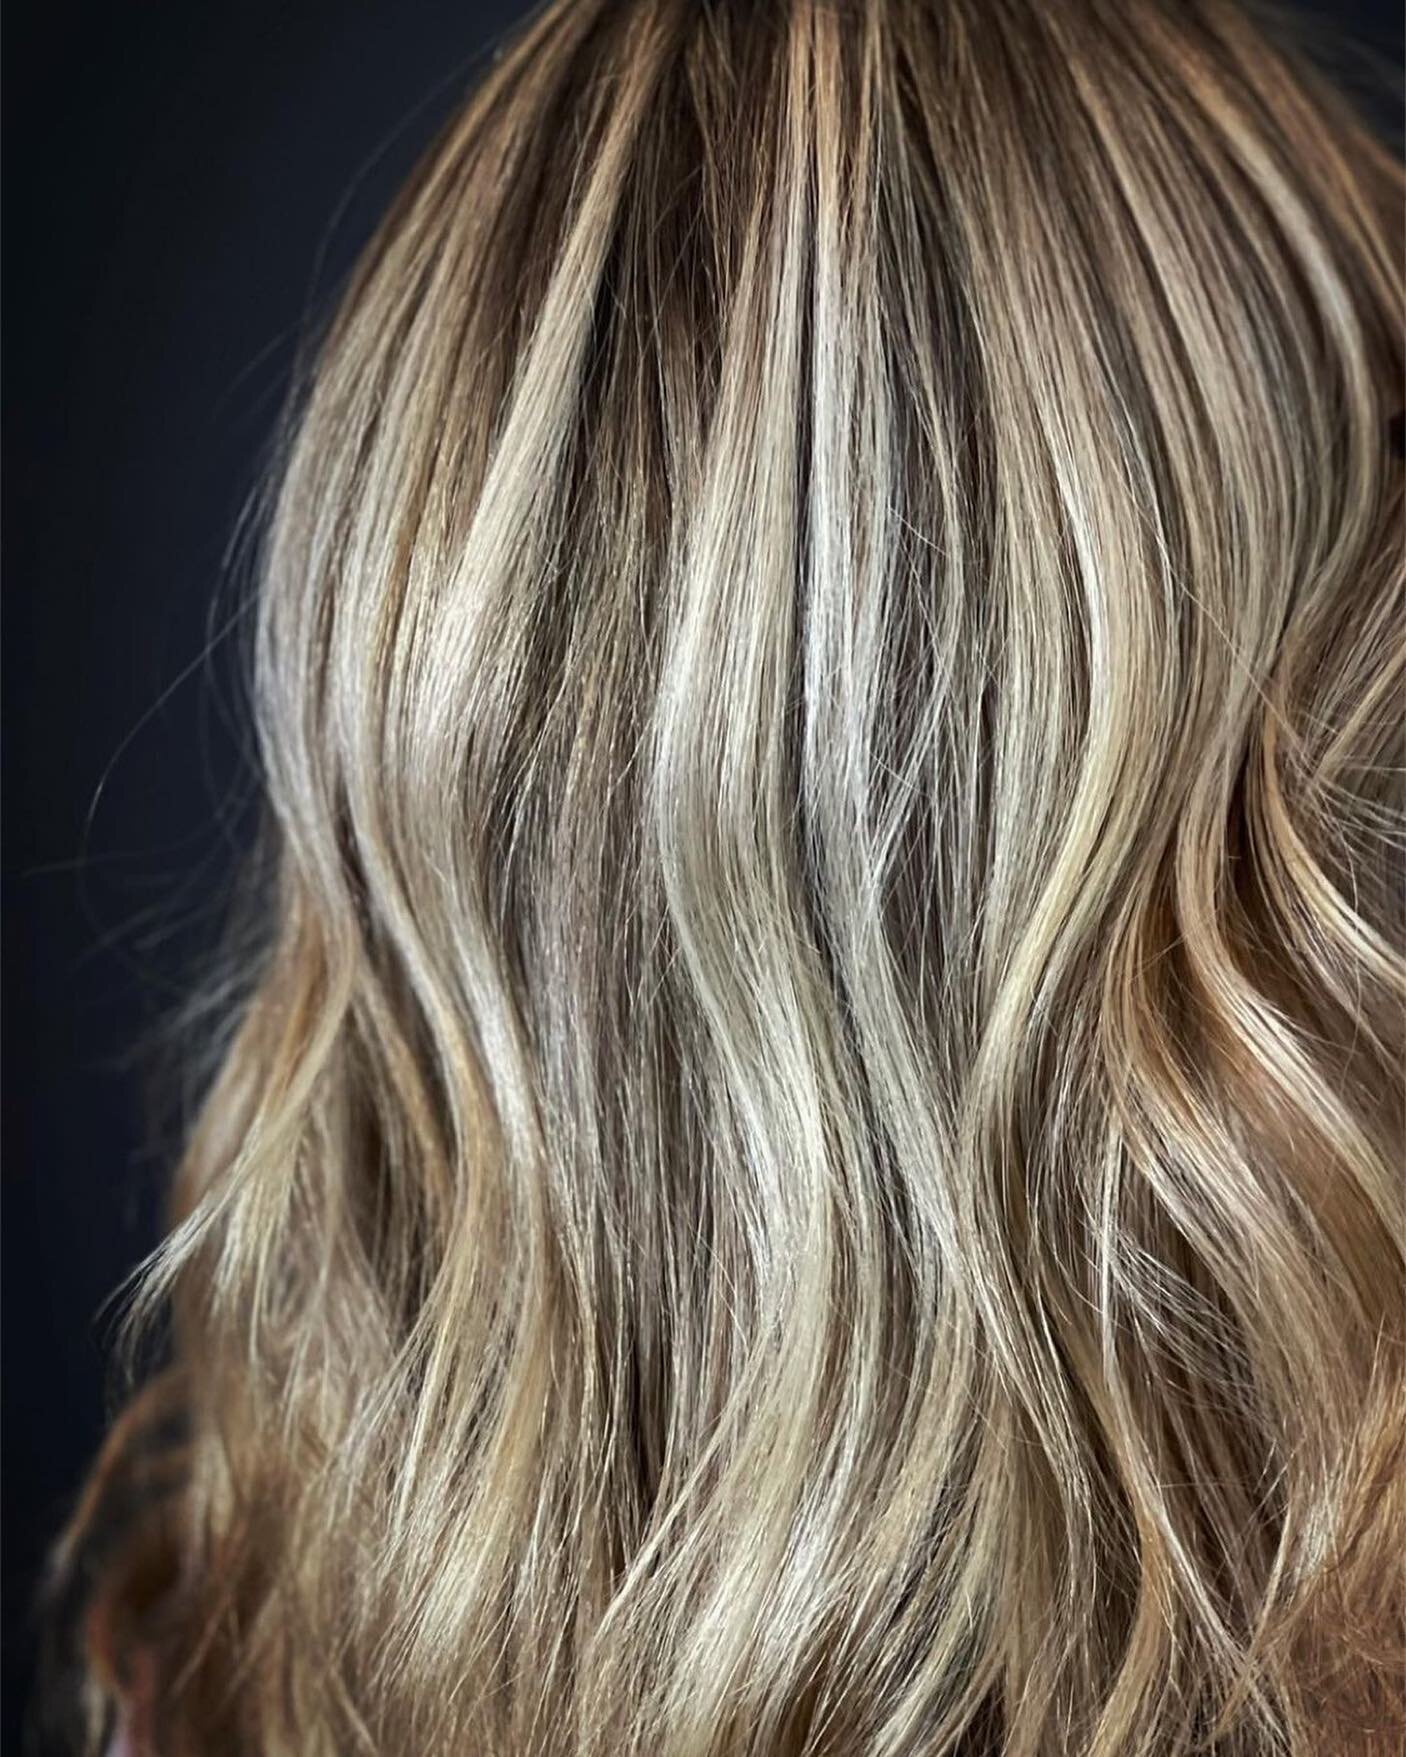 This color combo is a favorite. 

Repost from @teasa_mack
&bull;
It&rsquo;s all in the detail. 👀
-
#bendhair #bend #bendlife #bendhikes #bendor #centraloregon #downtownbend #inbend #bendhairstylist #bendhairsalon